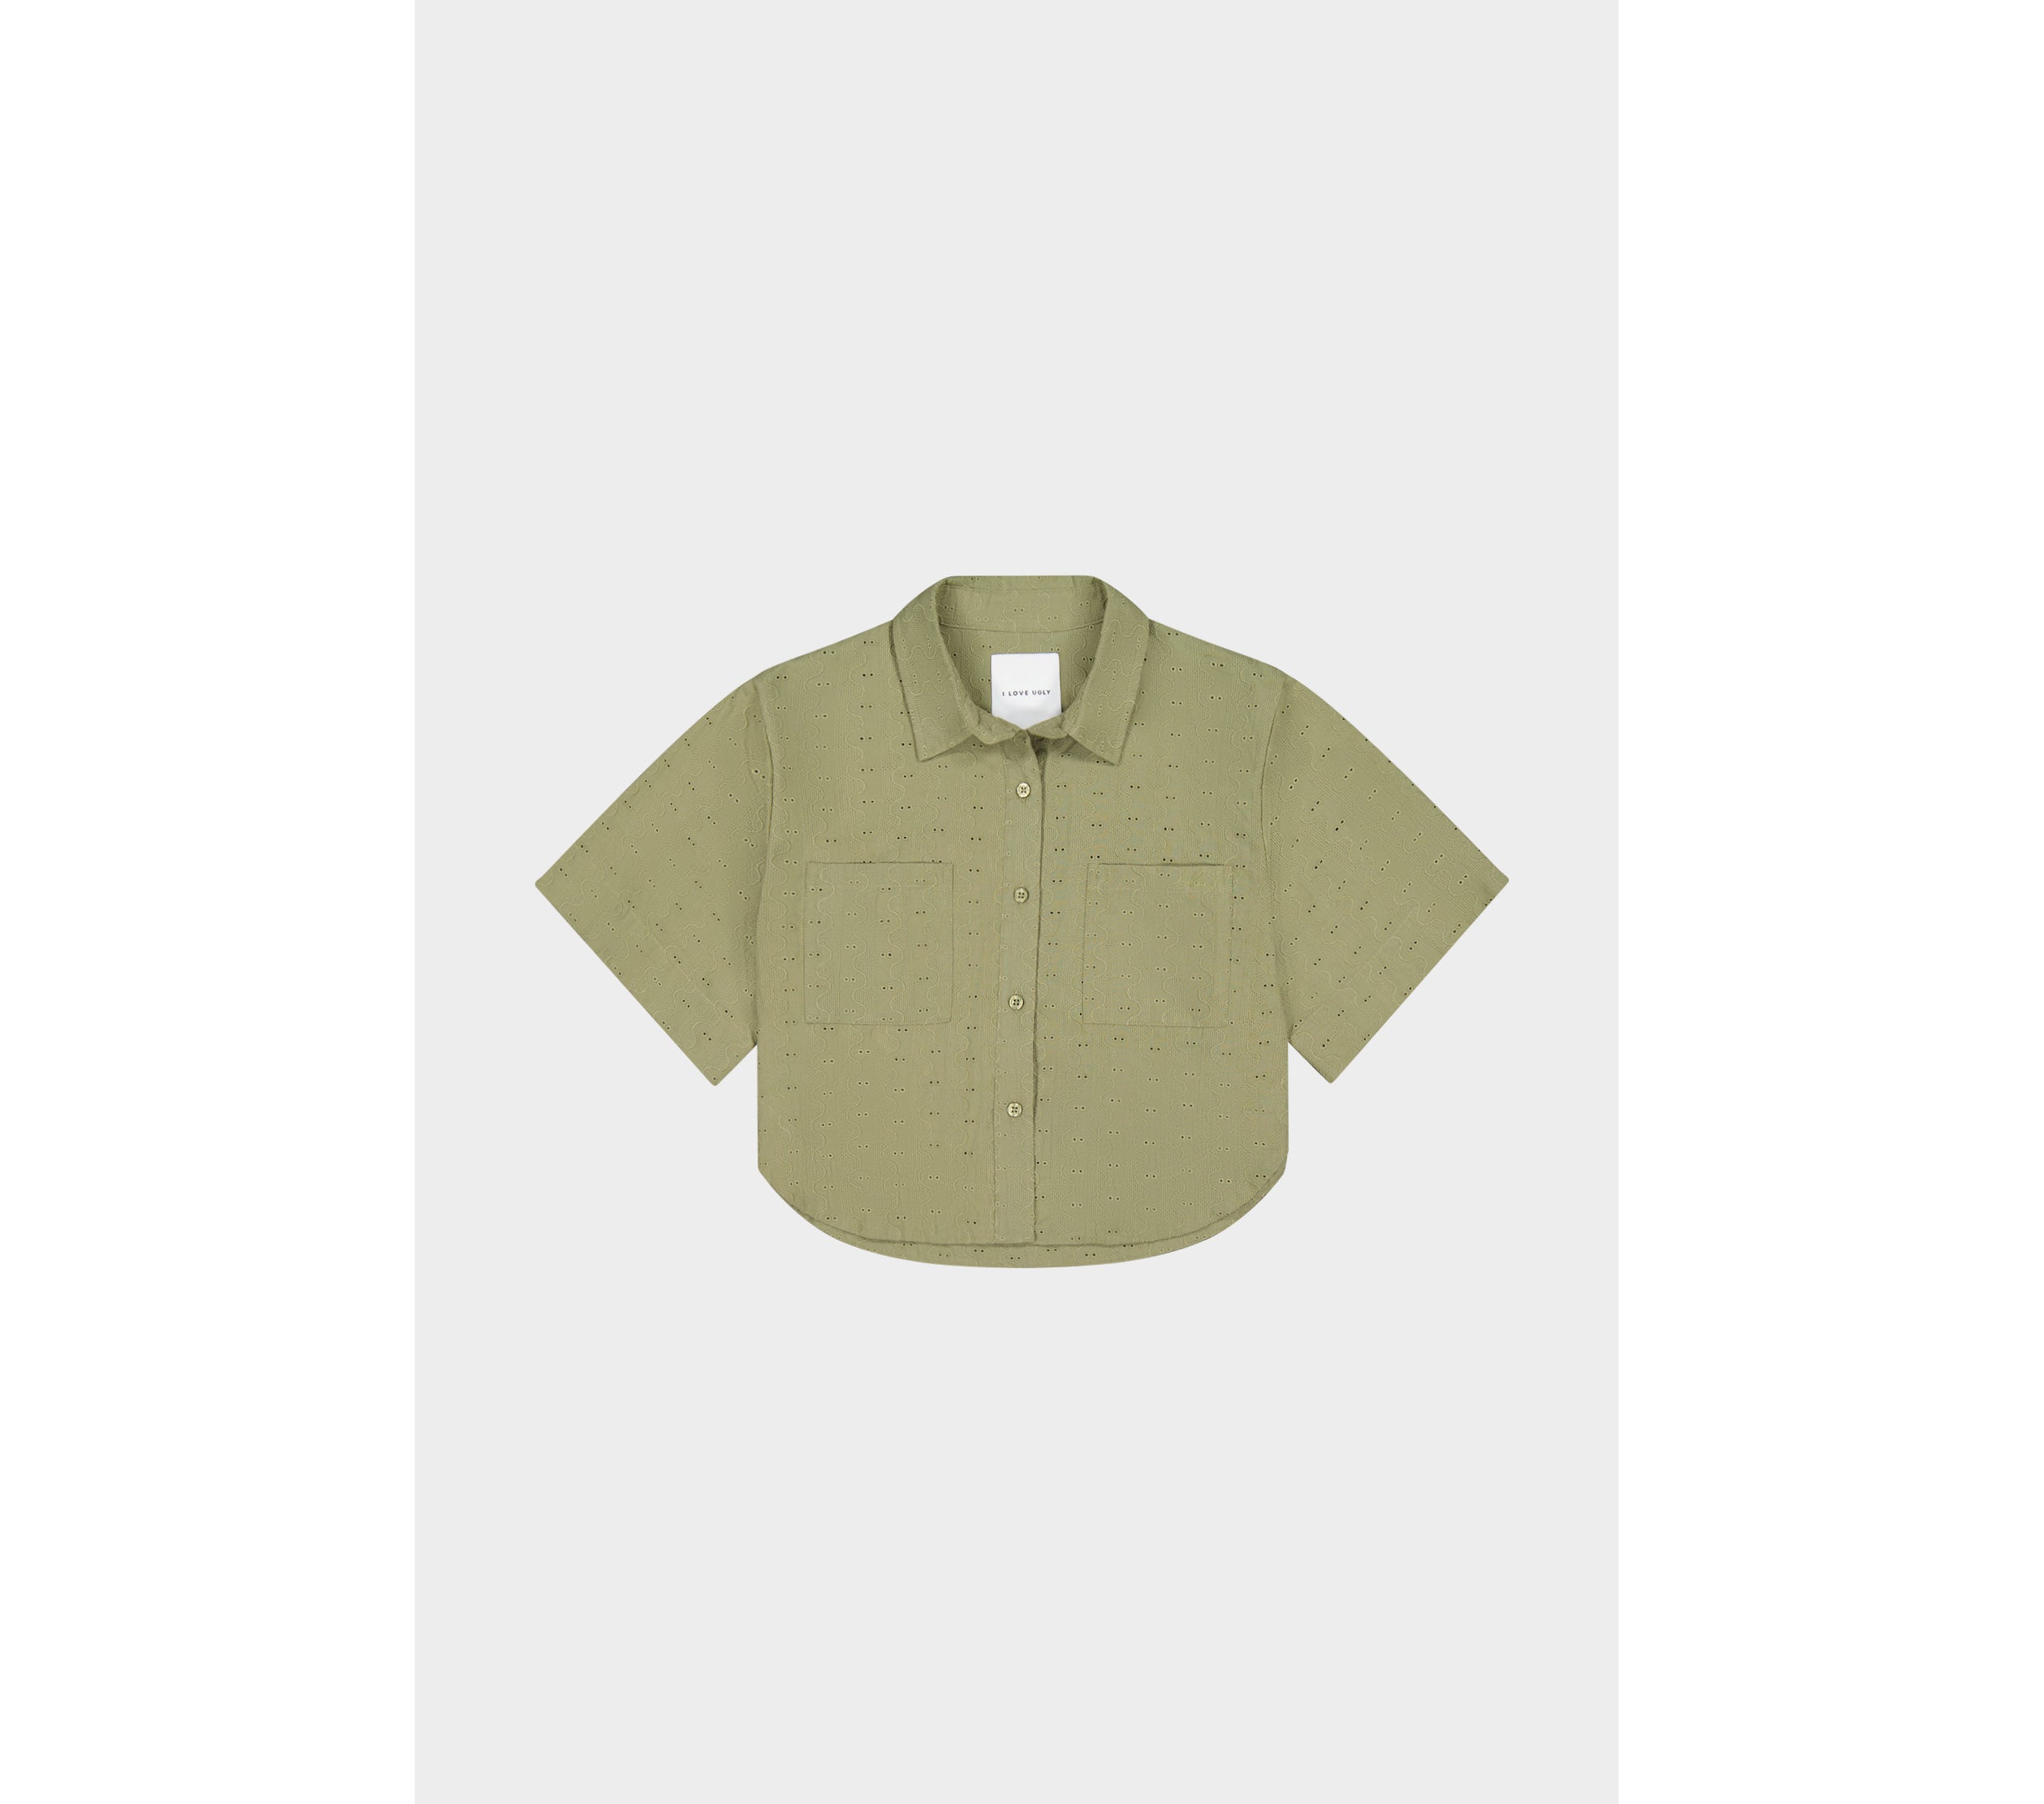 Edie Cropped SS Shirt - Sage Lace